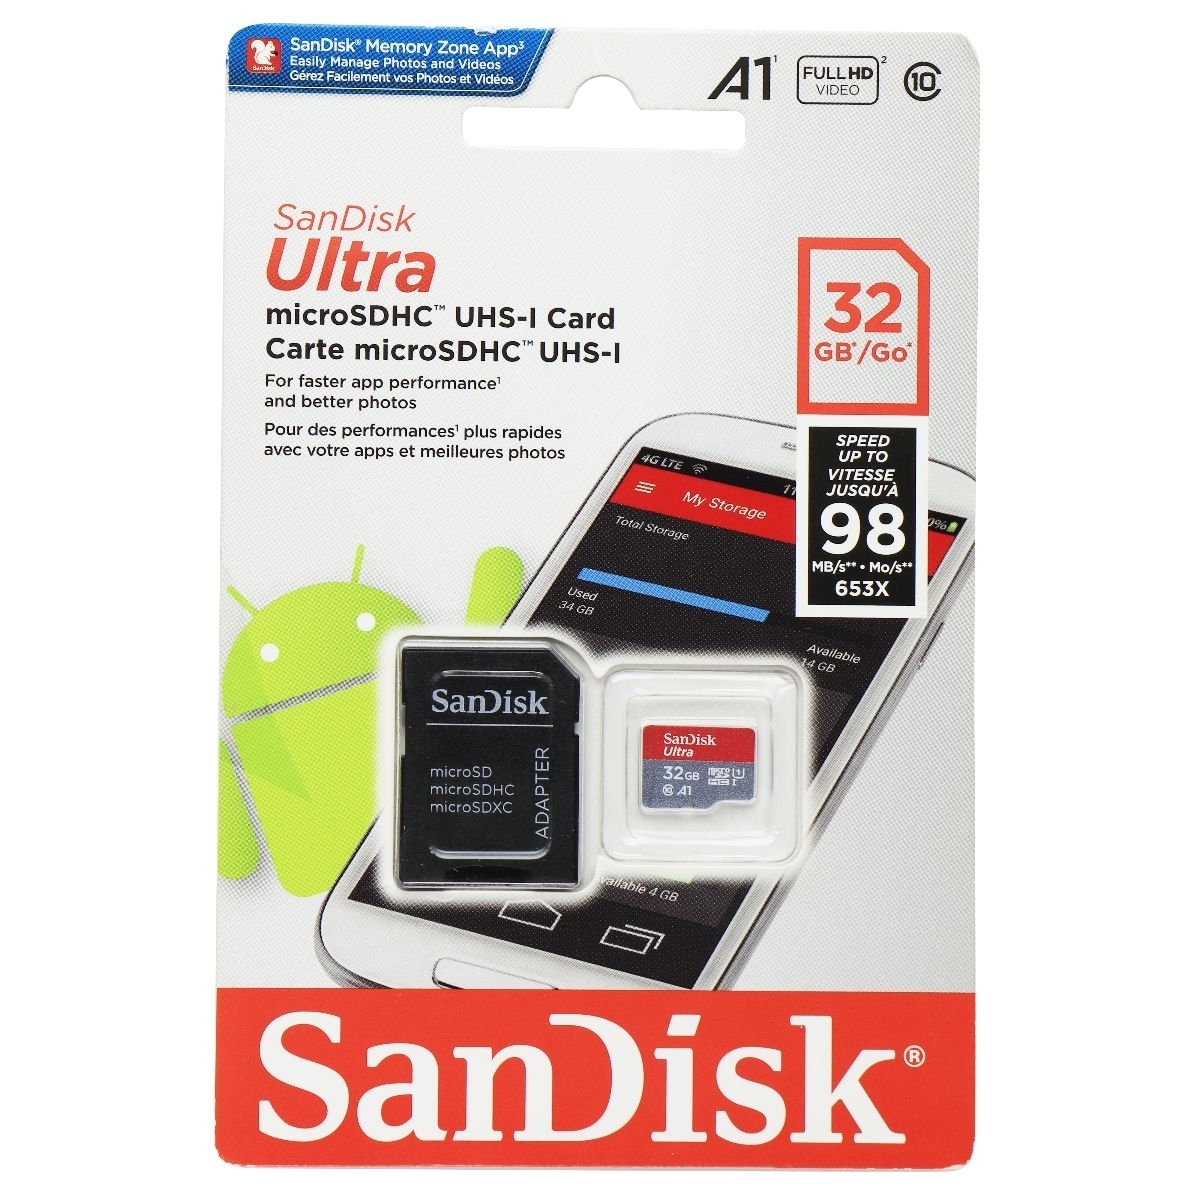 SanDisk Ultra MicroSDHC UHS-1 Card And Adapter (32GB) Class 10 A1 (Refurbished)